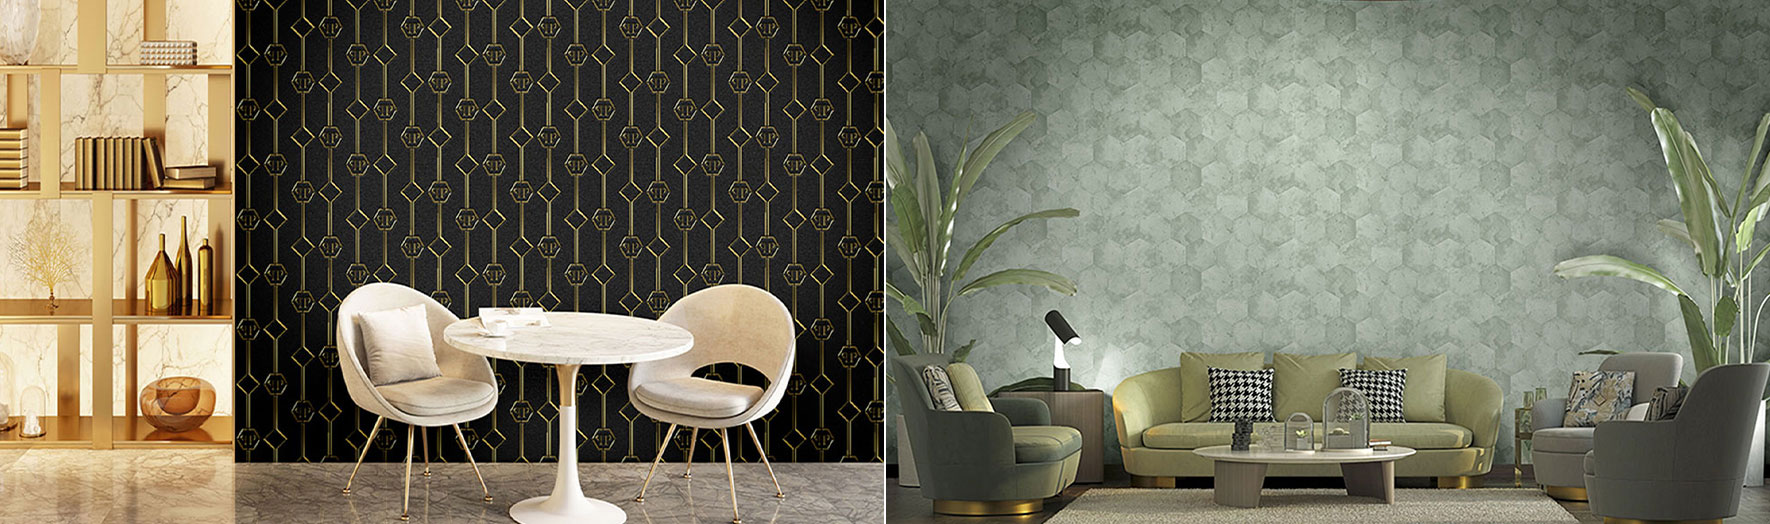 Luxury wallpapers for the home of your dreams